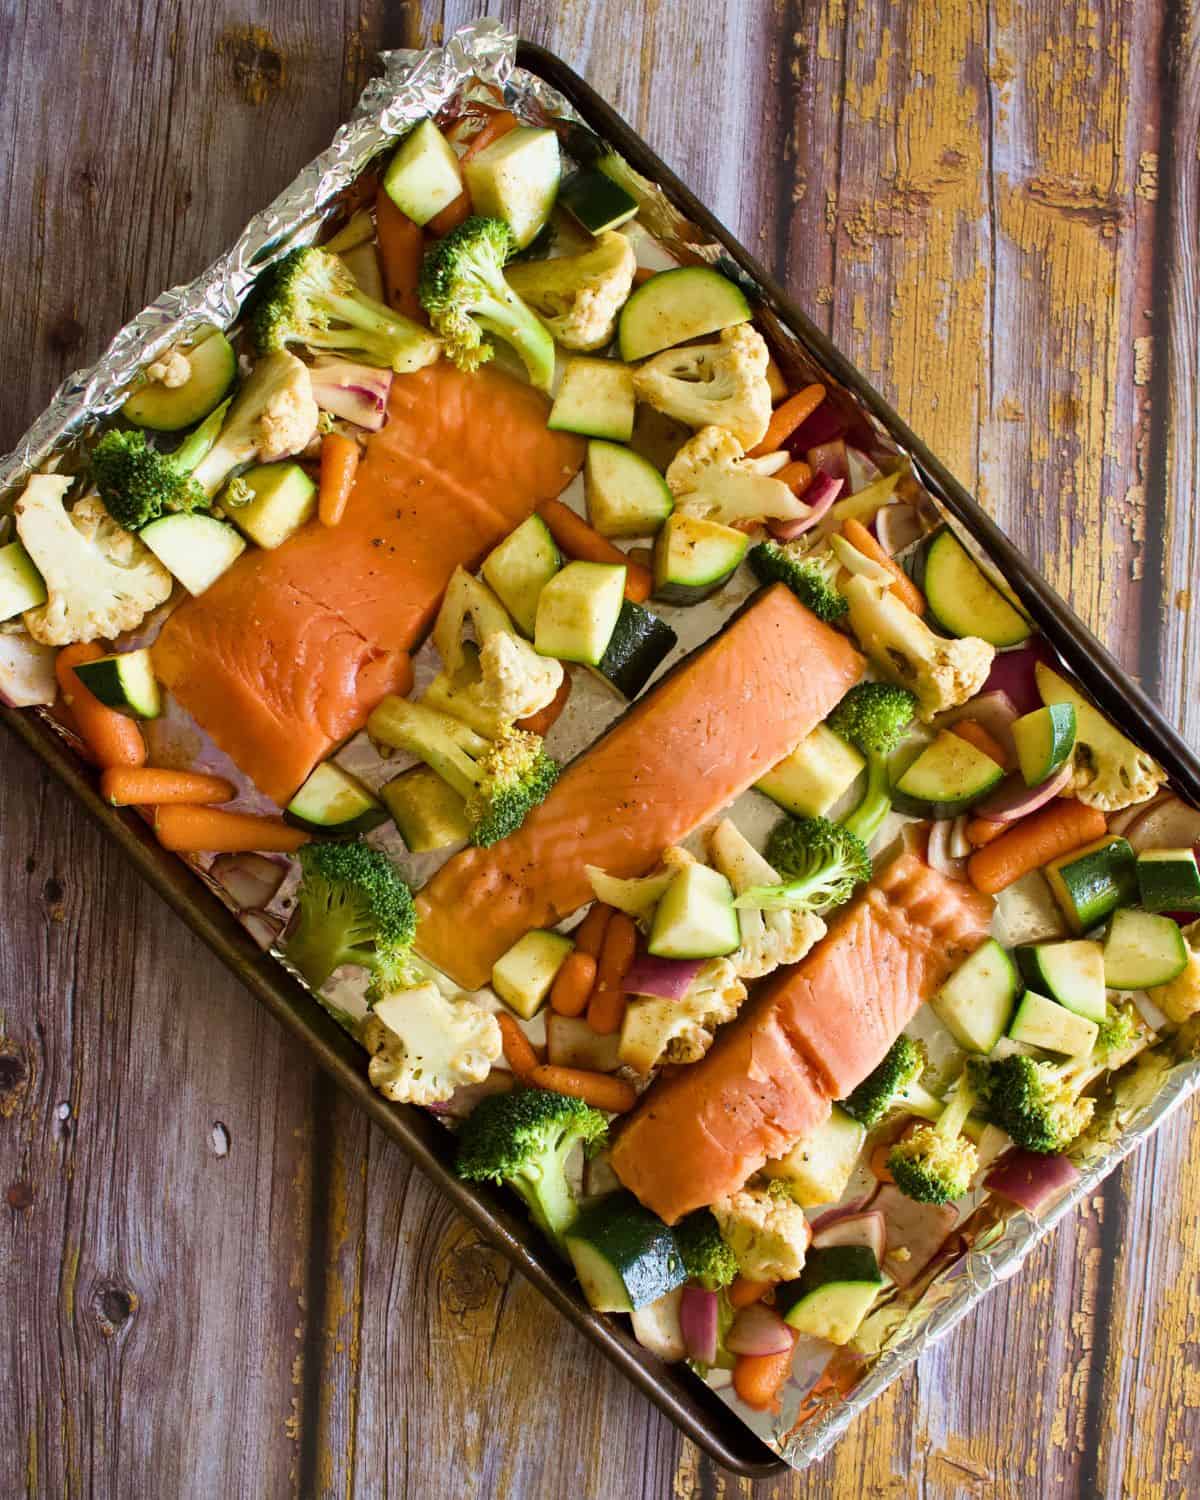 A sheet pan with salmon and vegetables ready for the oven.